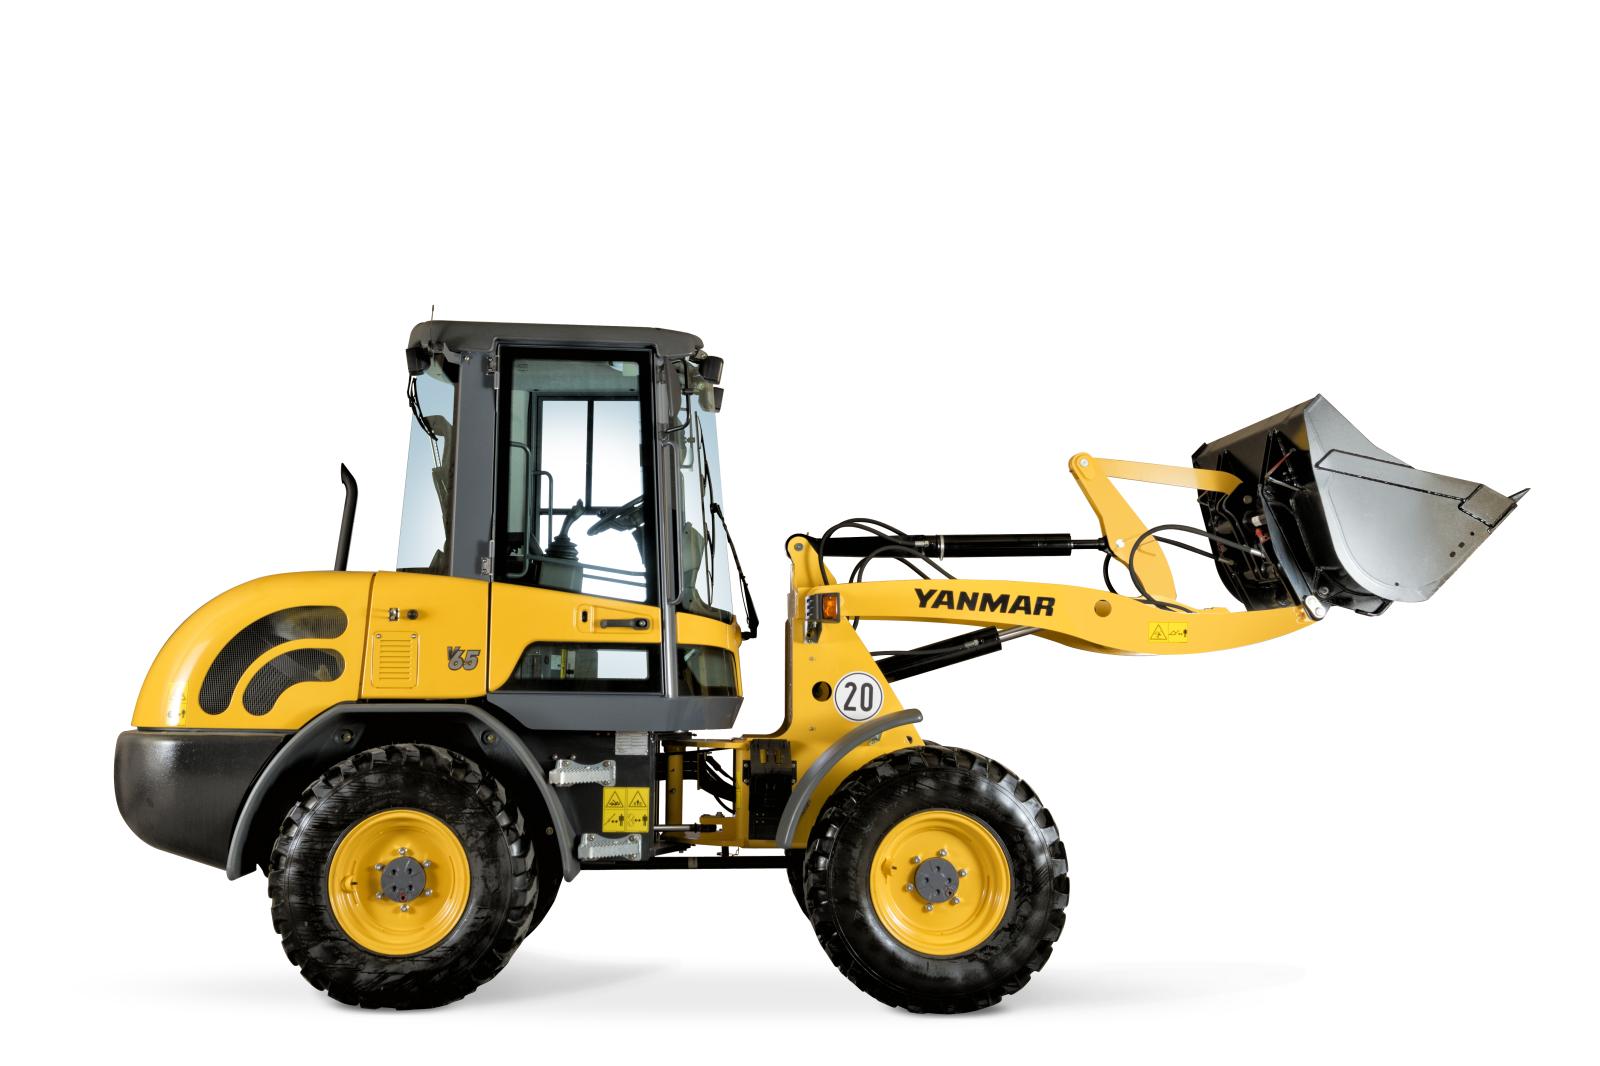 Yanmar Introduces New Compact Wheeled Loader